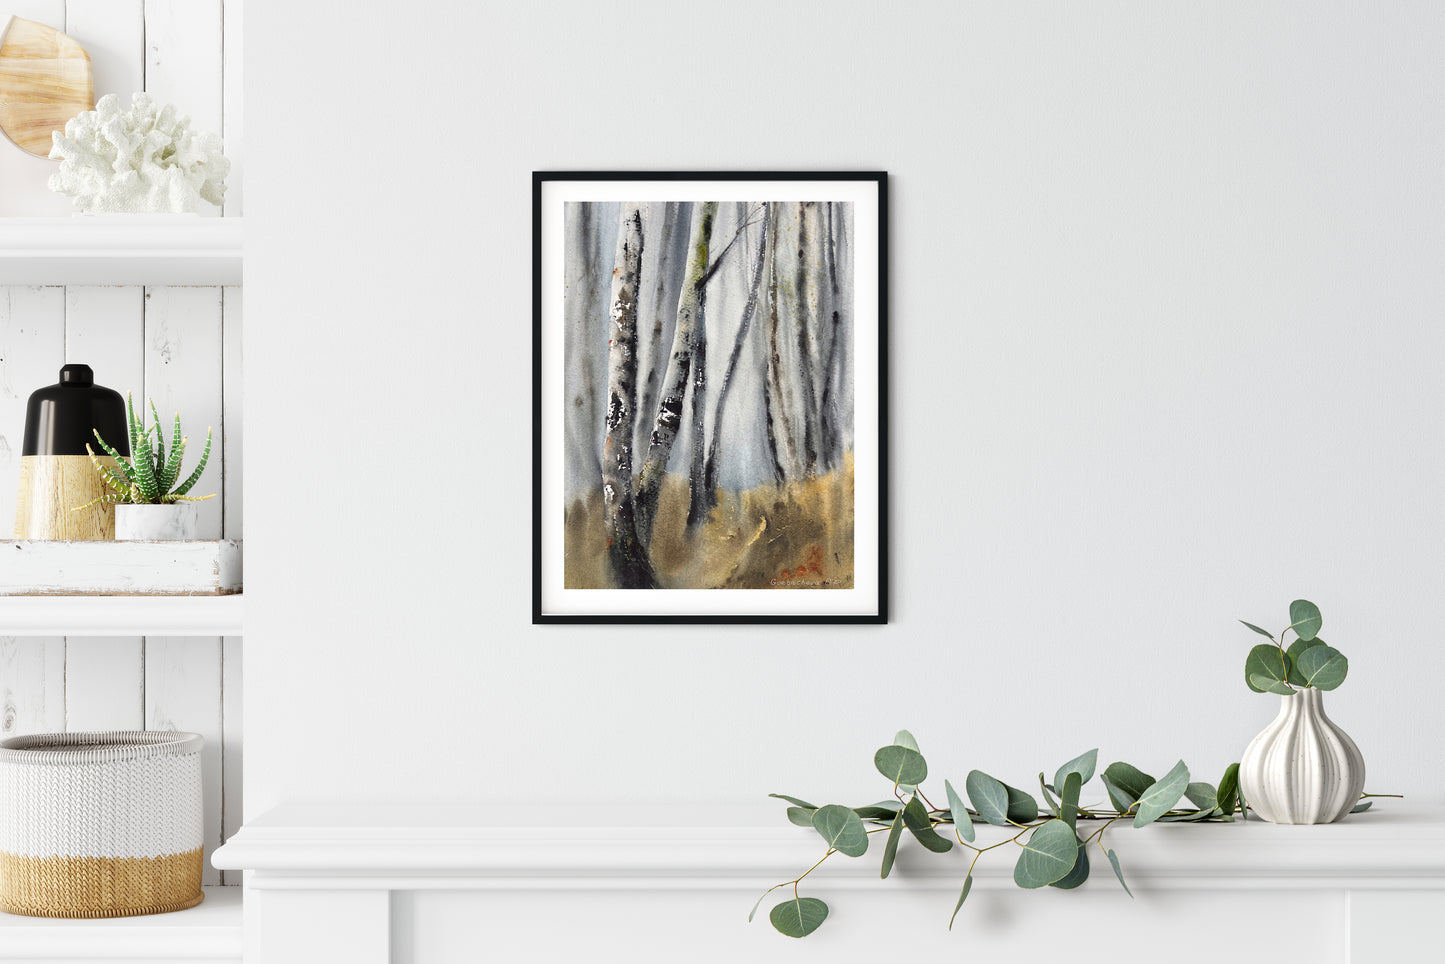 Birch Forest Original Watercolor Painting, Nature Wall Art, Autumn trees, Scenery Landscape Artwork